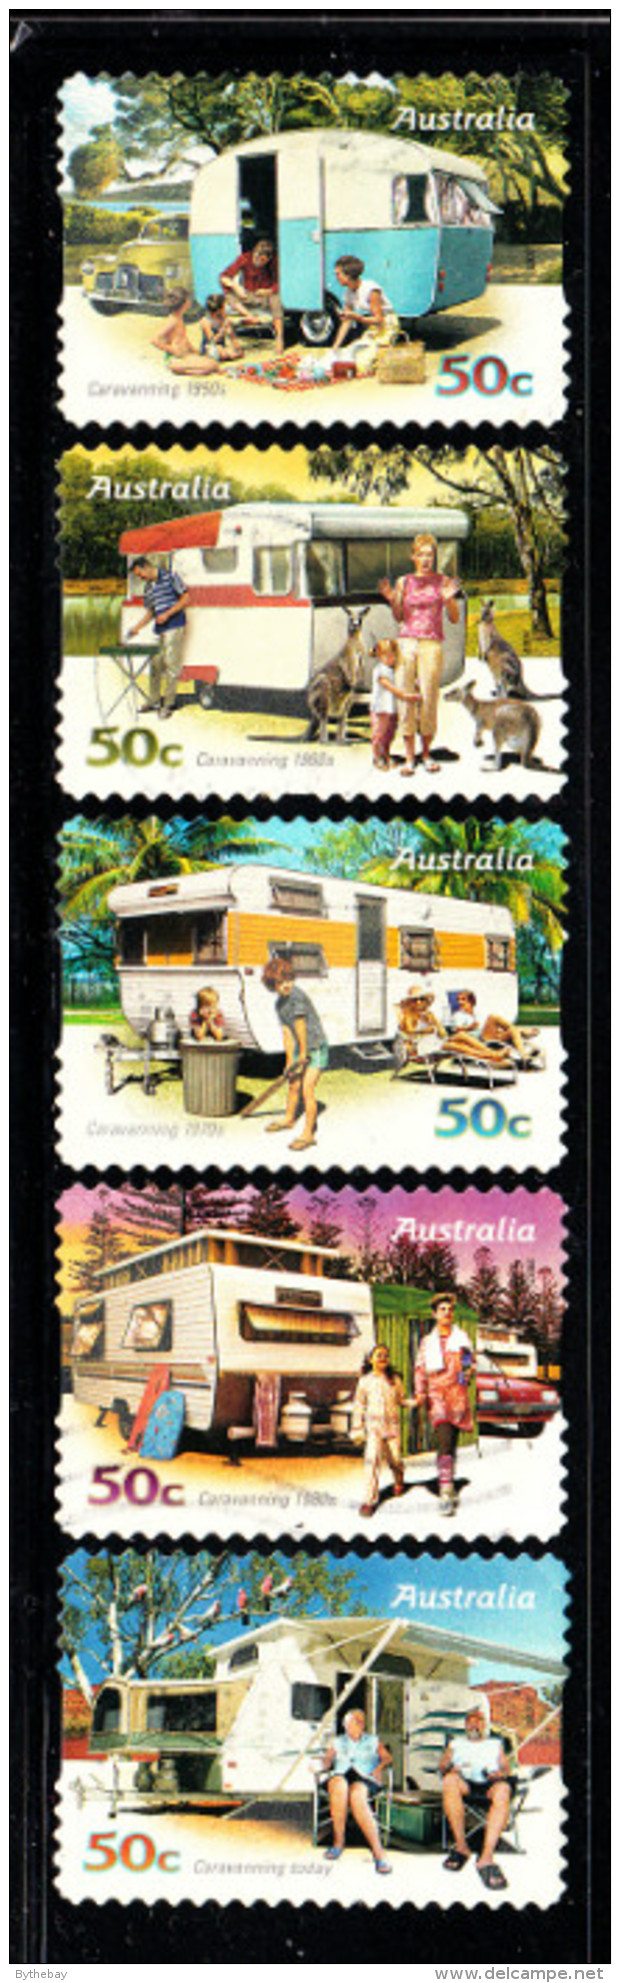 Australia Used Scott #2753-#2757 Set Of 5 50c Caravanning 1950s To Today - Used Stamps